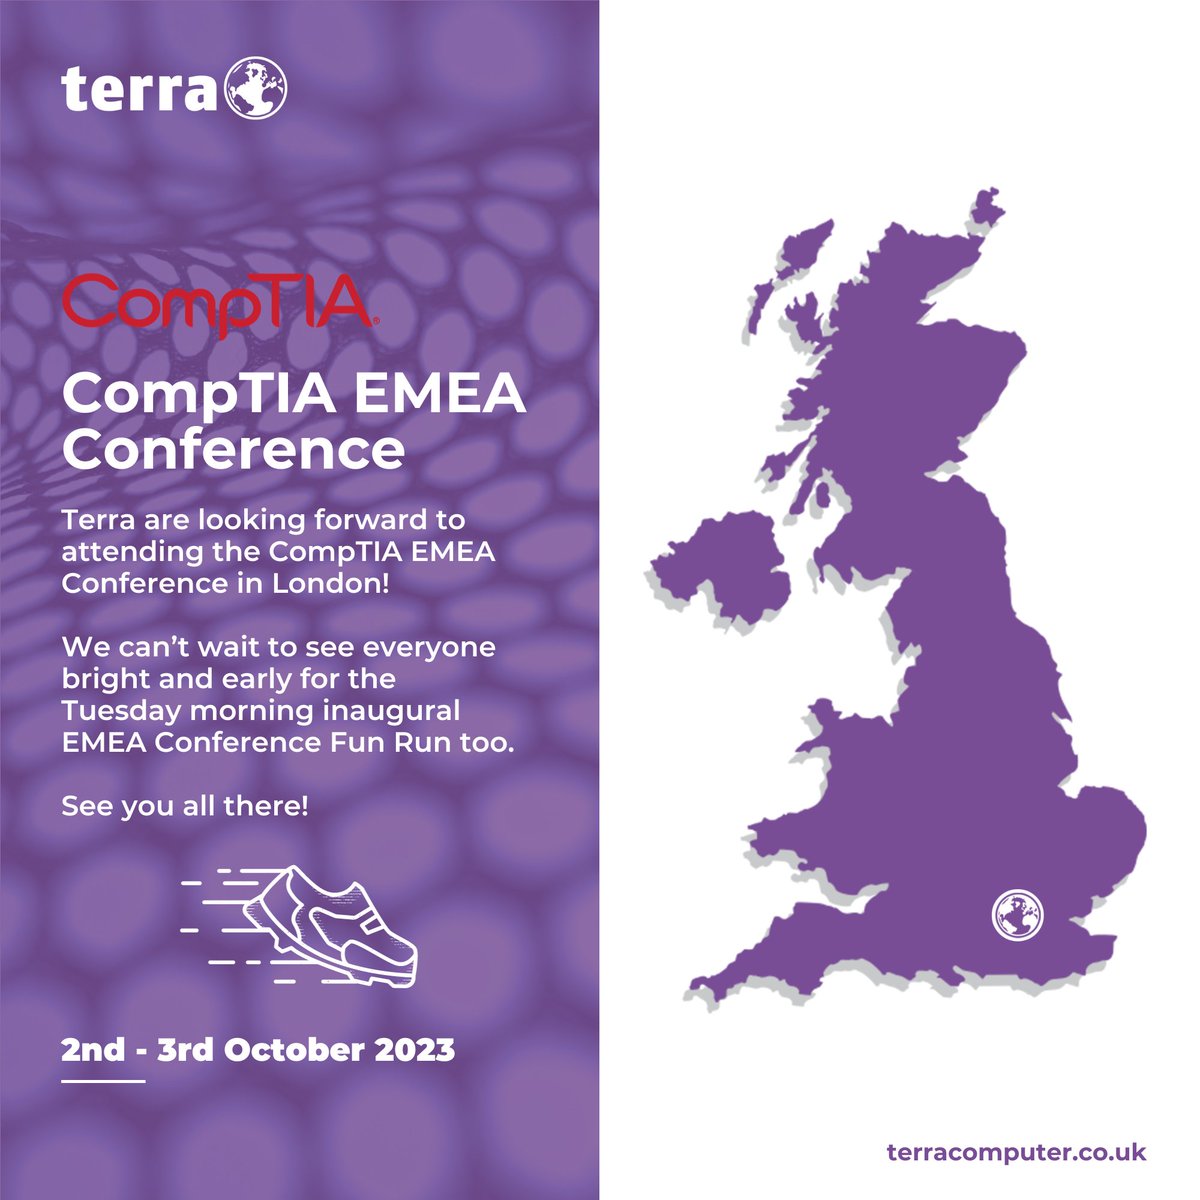 Terra are looking forward to attending the @CompTIA EMEA Conference in London! We'll be on stand 50, so come and say hello!

See you all there! 

#teamterra #iuseterra #EMEACon #CompTIACommunity